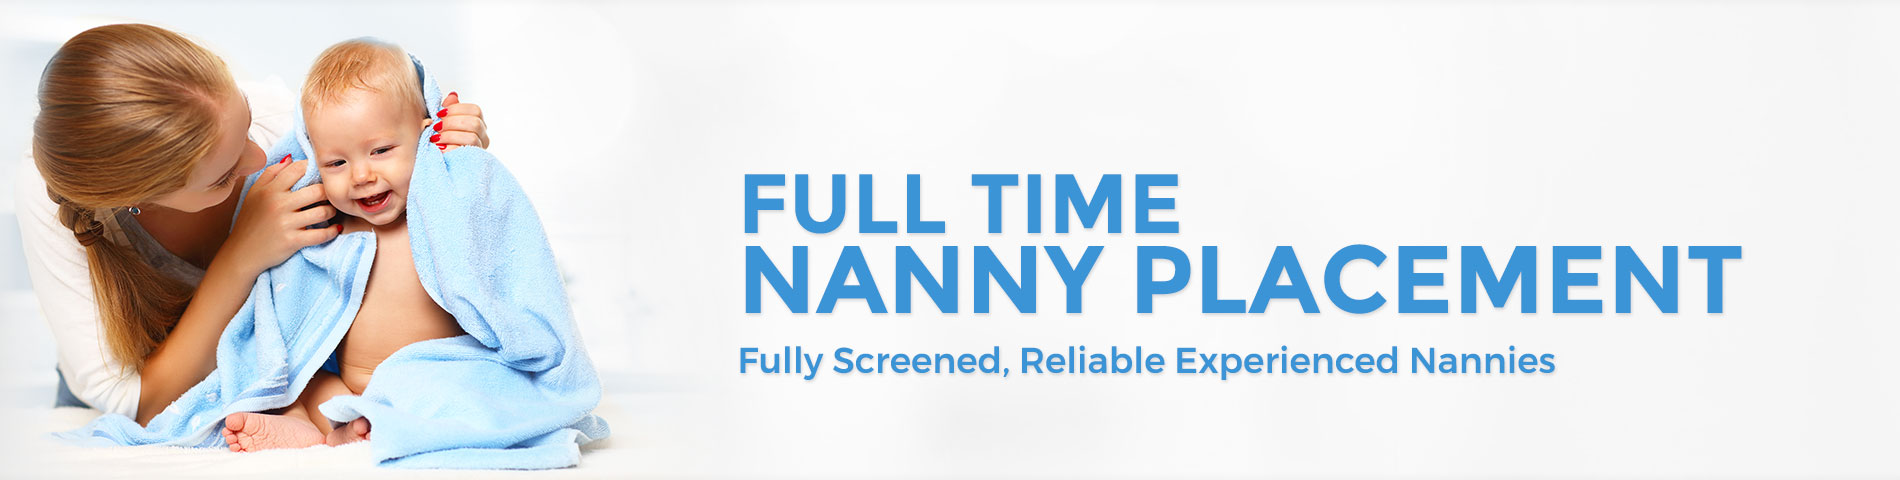 Full Time Nanny Placement